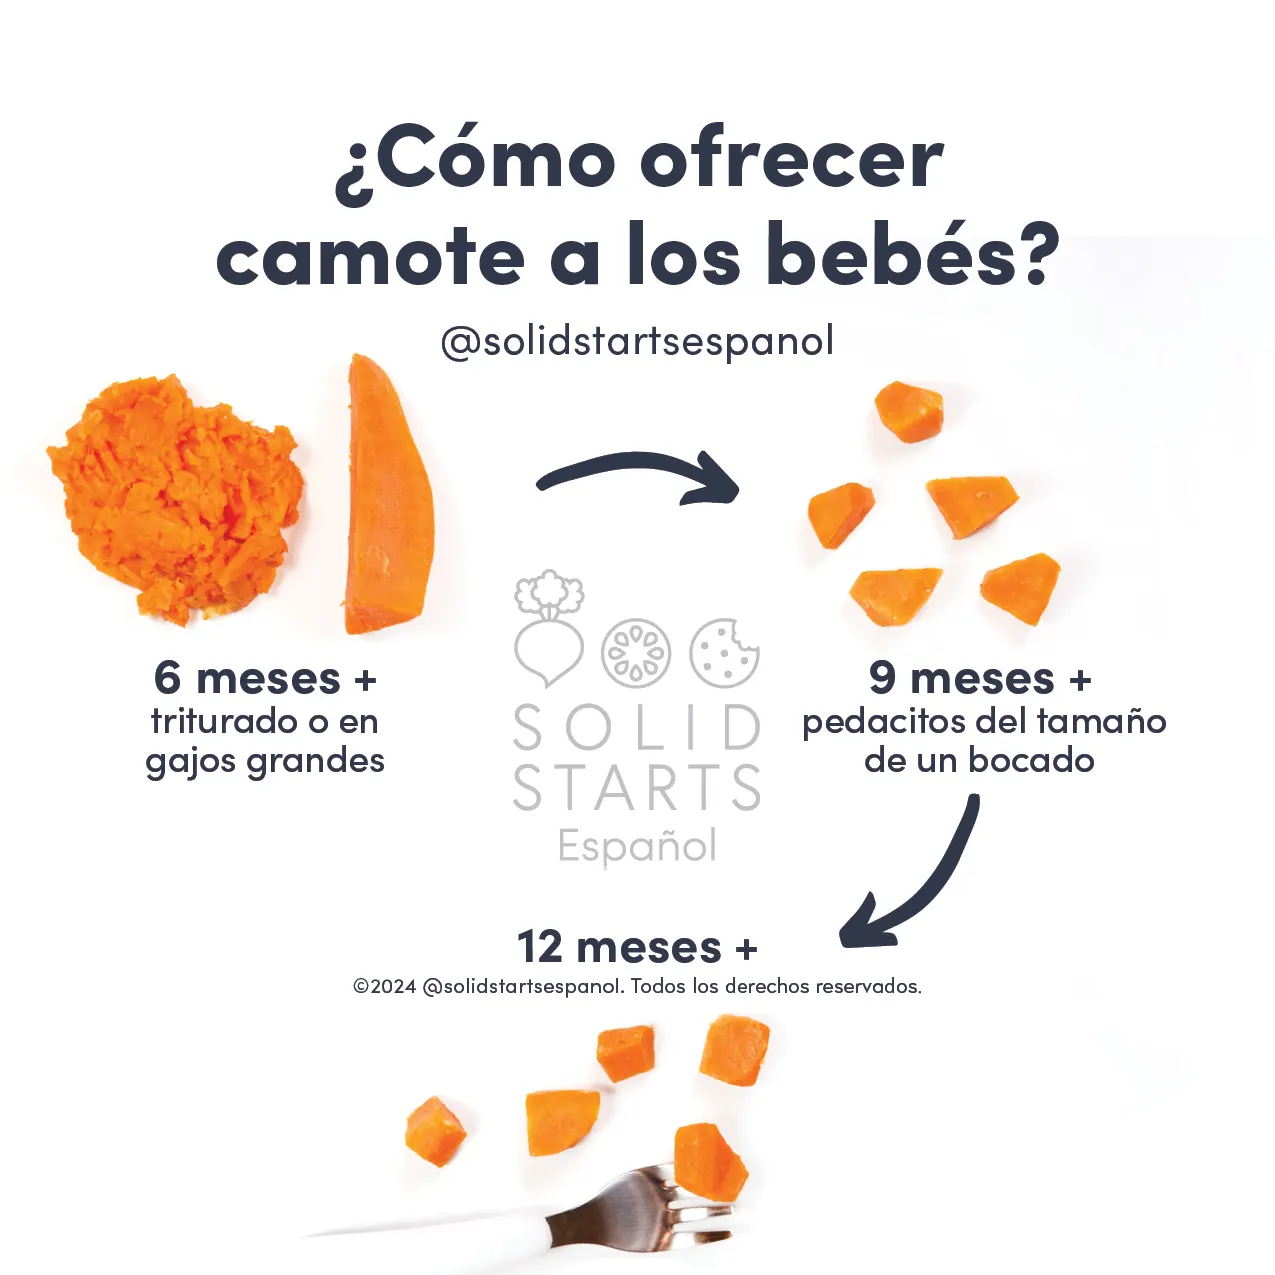 an infographic with the header "how to cut sweet potato for babies": long, thin cooked strips for babies 6 months+, small, bite-sized cooked pieces for babies 9 months +